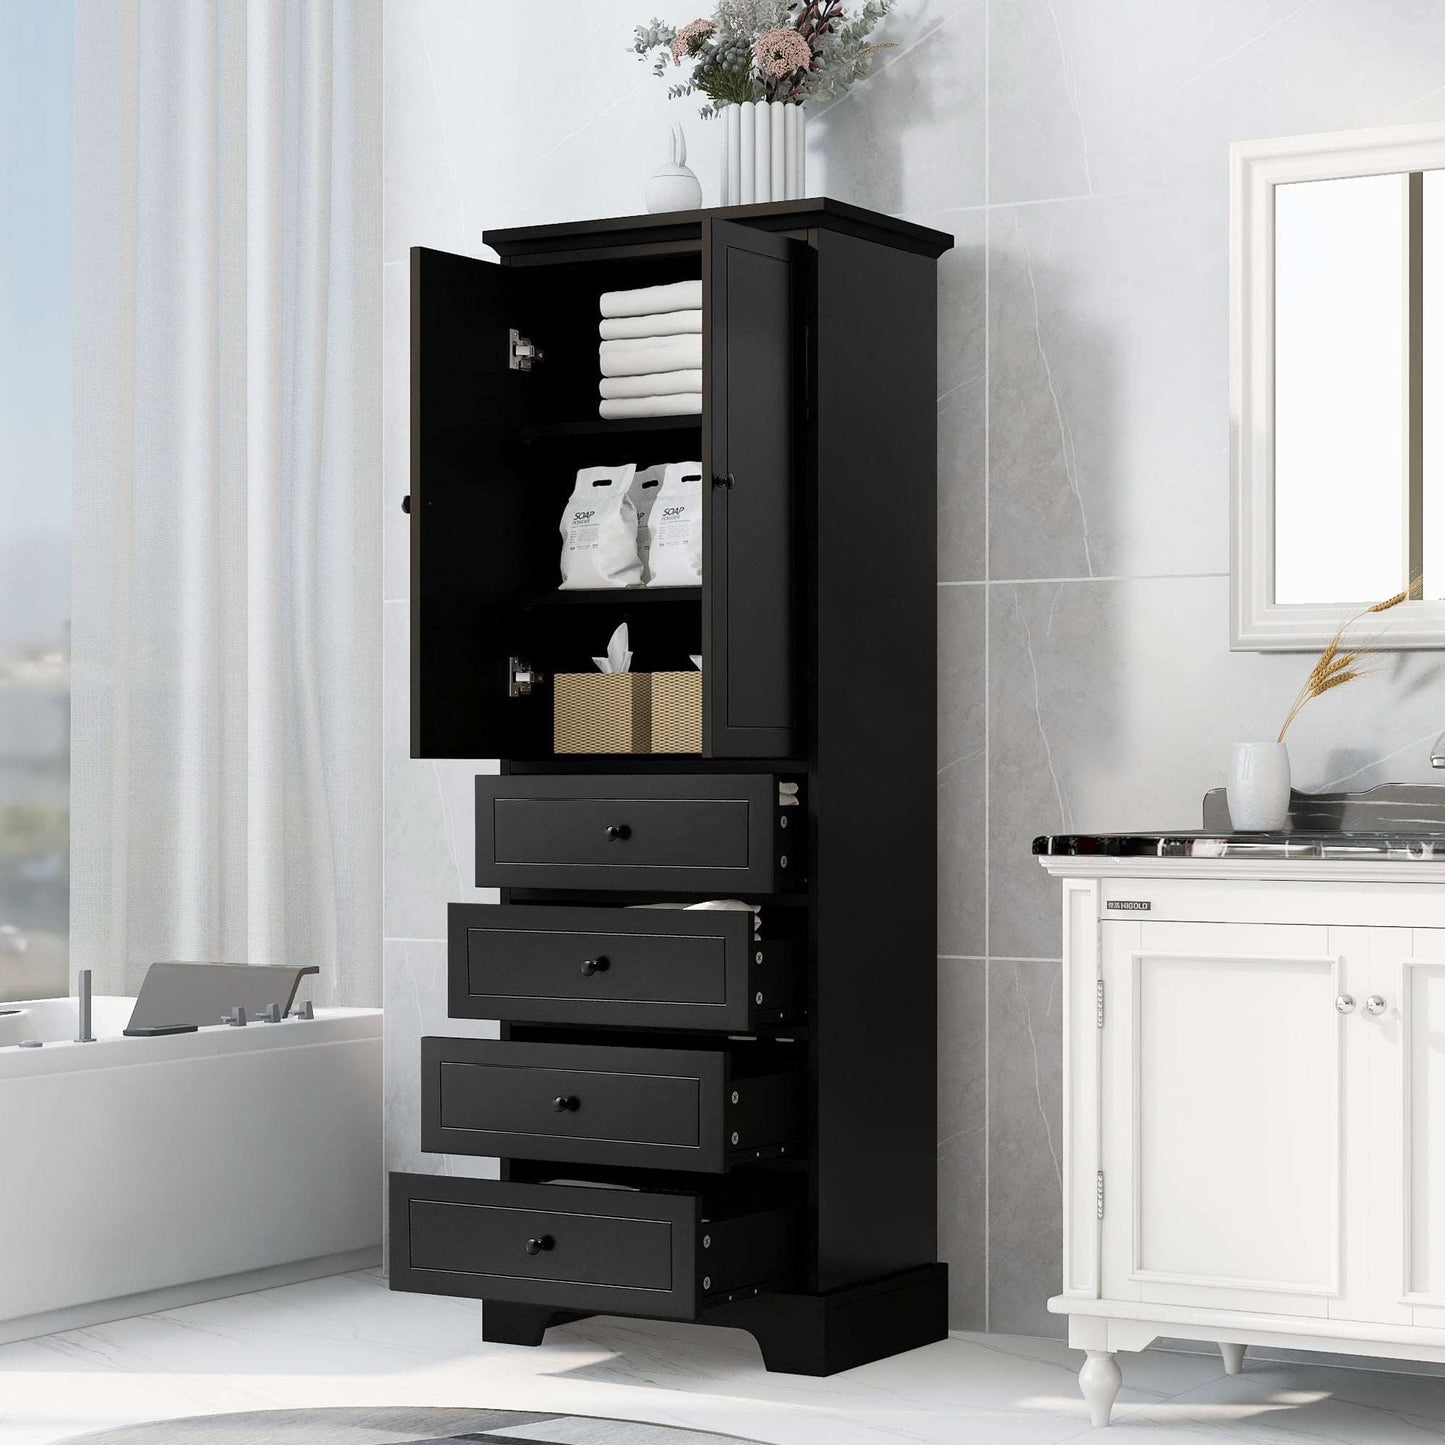 Storage Cabinet with 2 Doors and 4 Drawers for Bathroom Office Adjustable Shelf Grey White Black | ACE DECOR